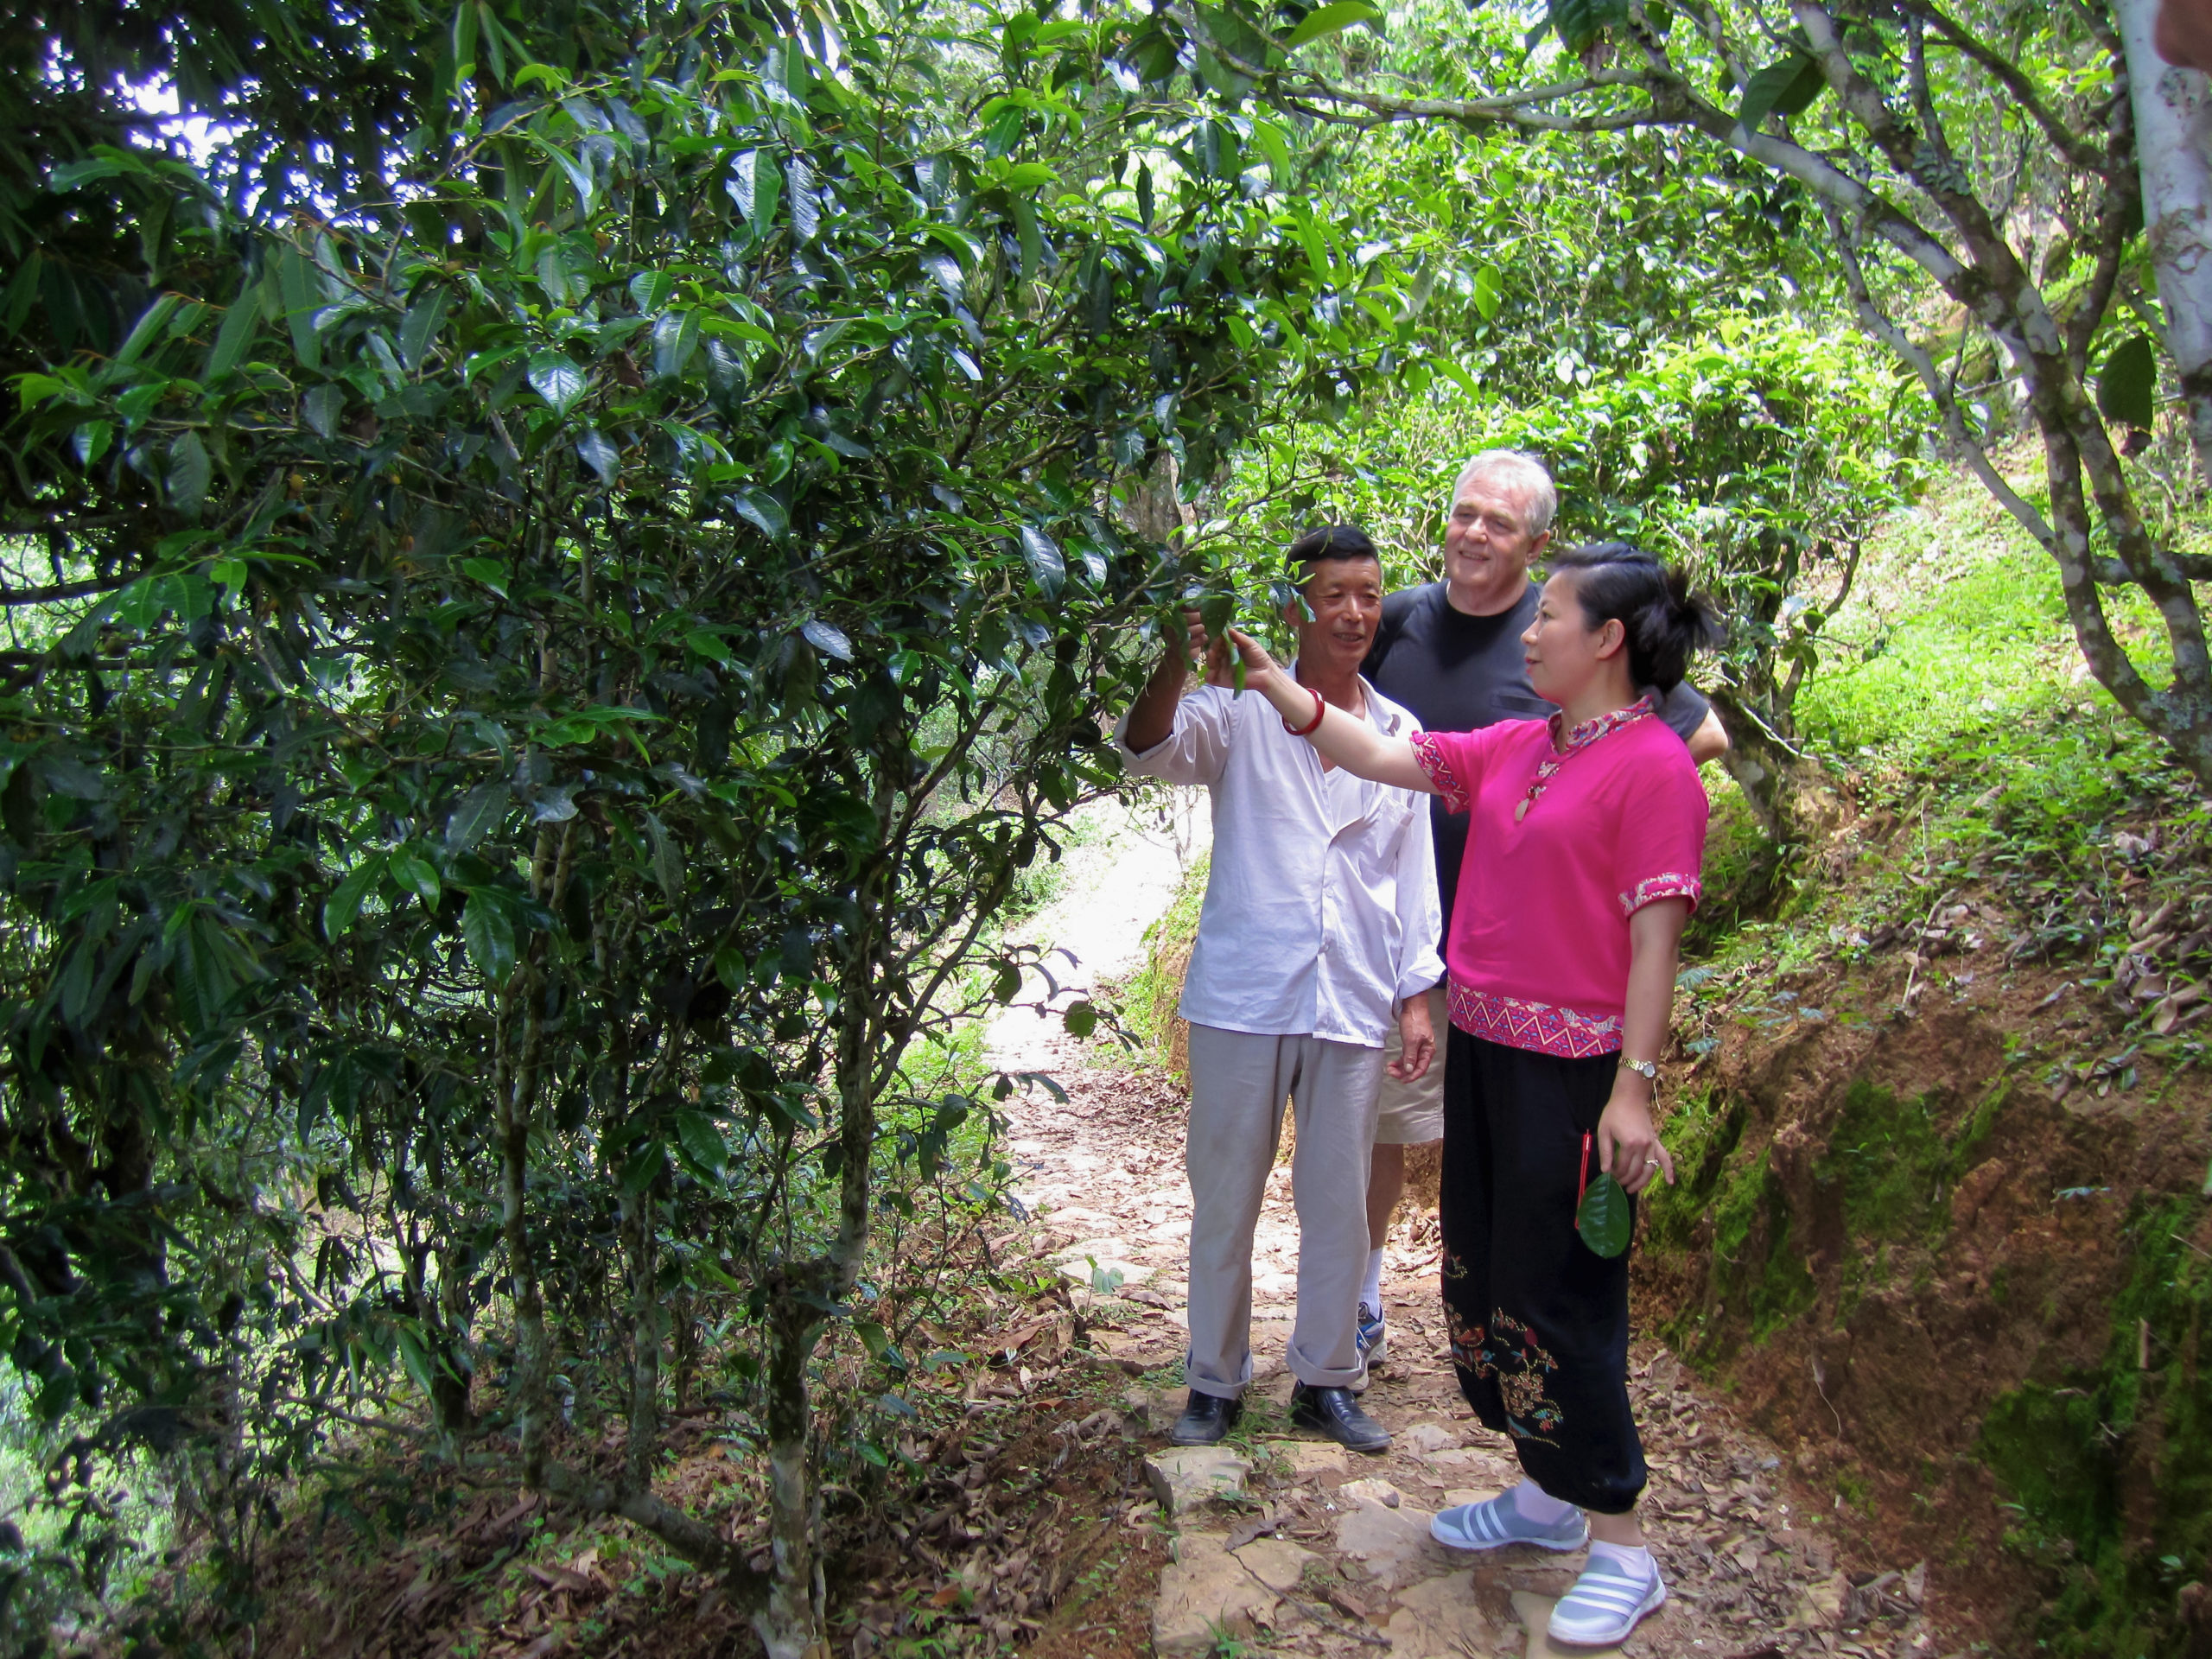 Three people examining a tea bush taller than they are on a dirt path in the forest.